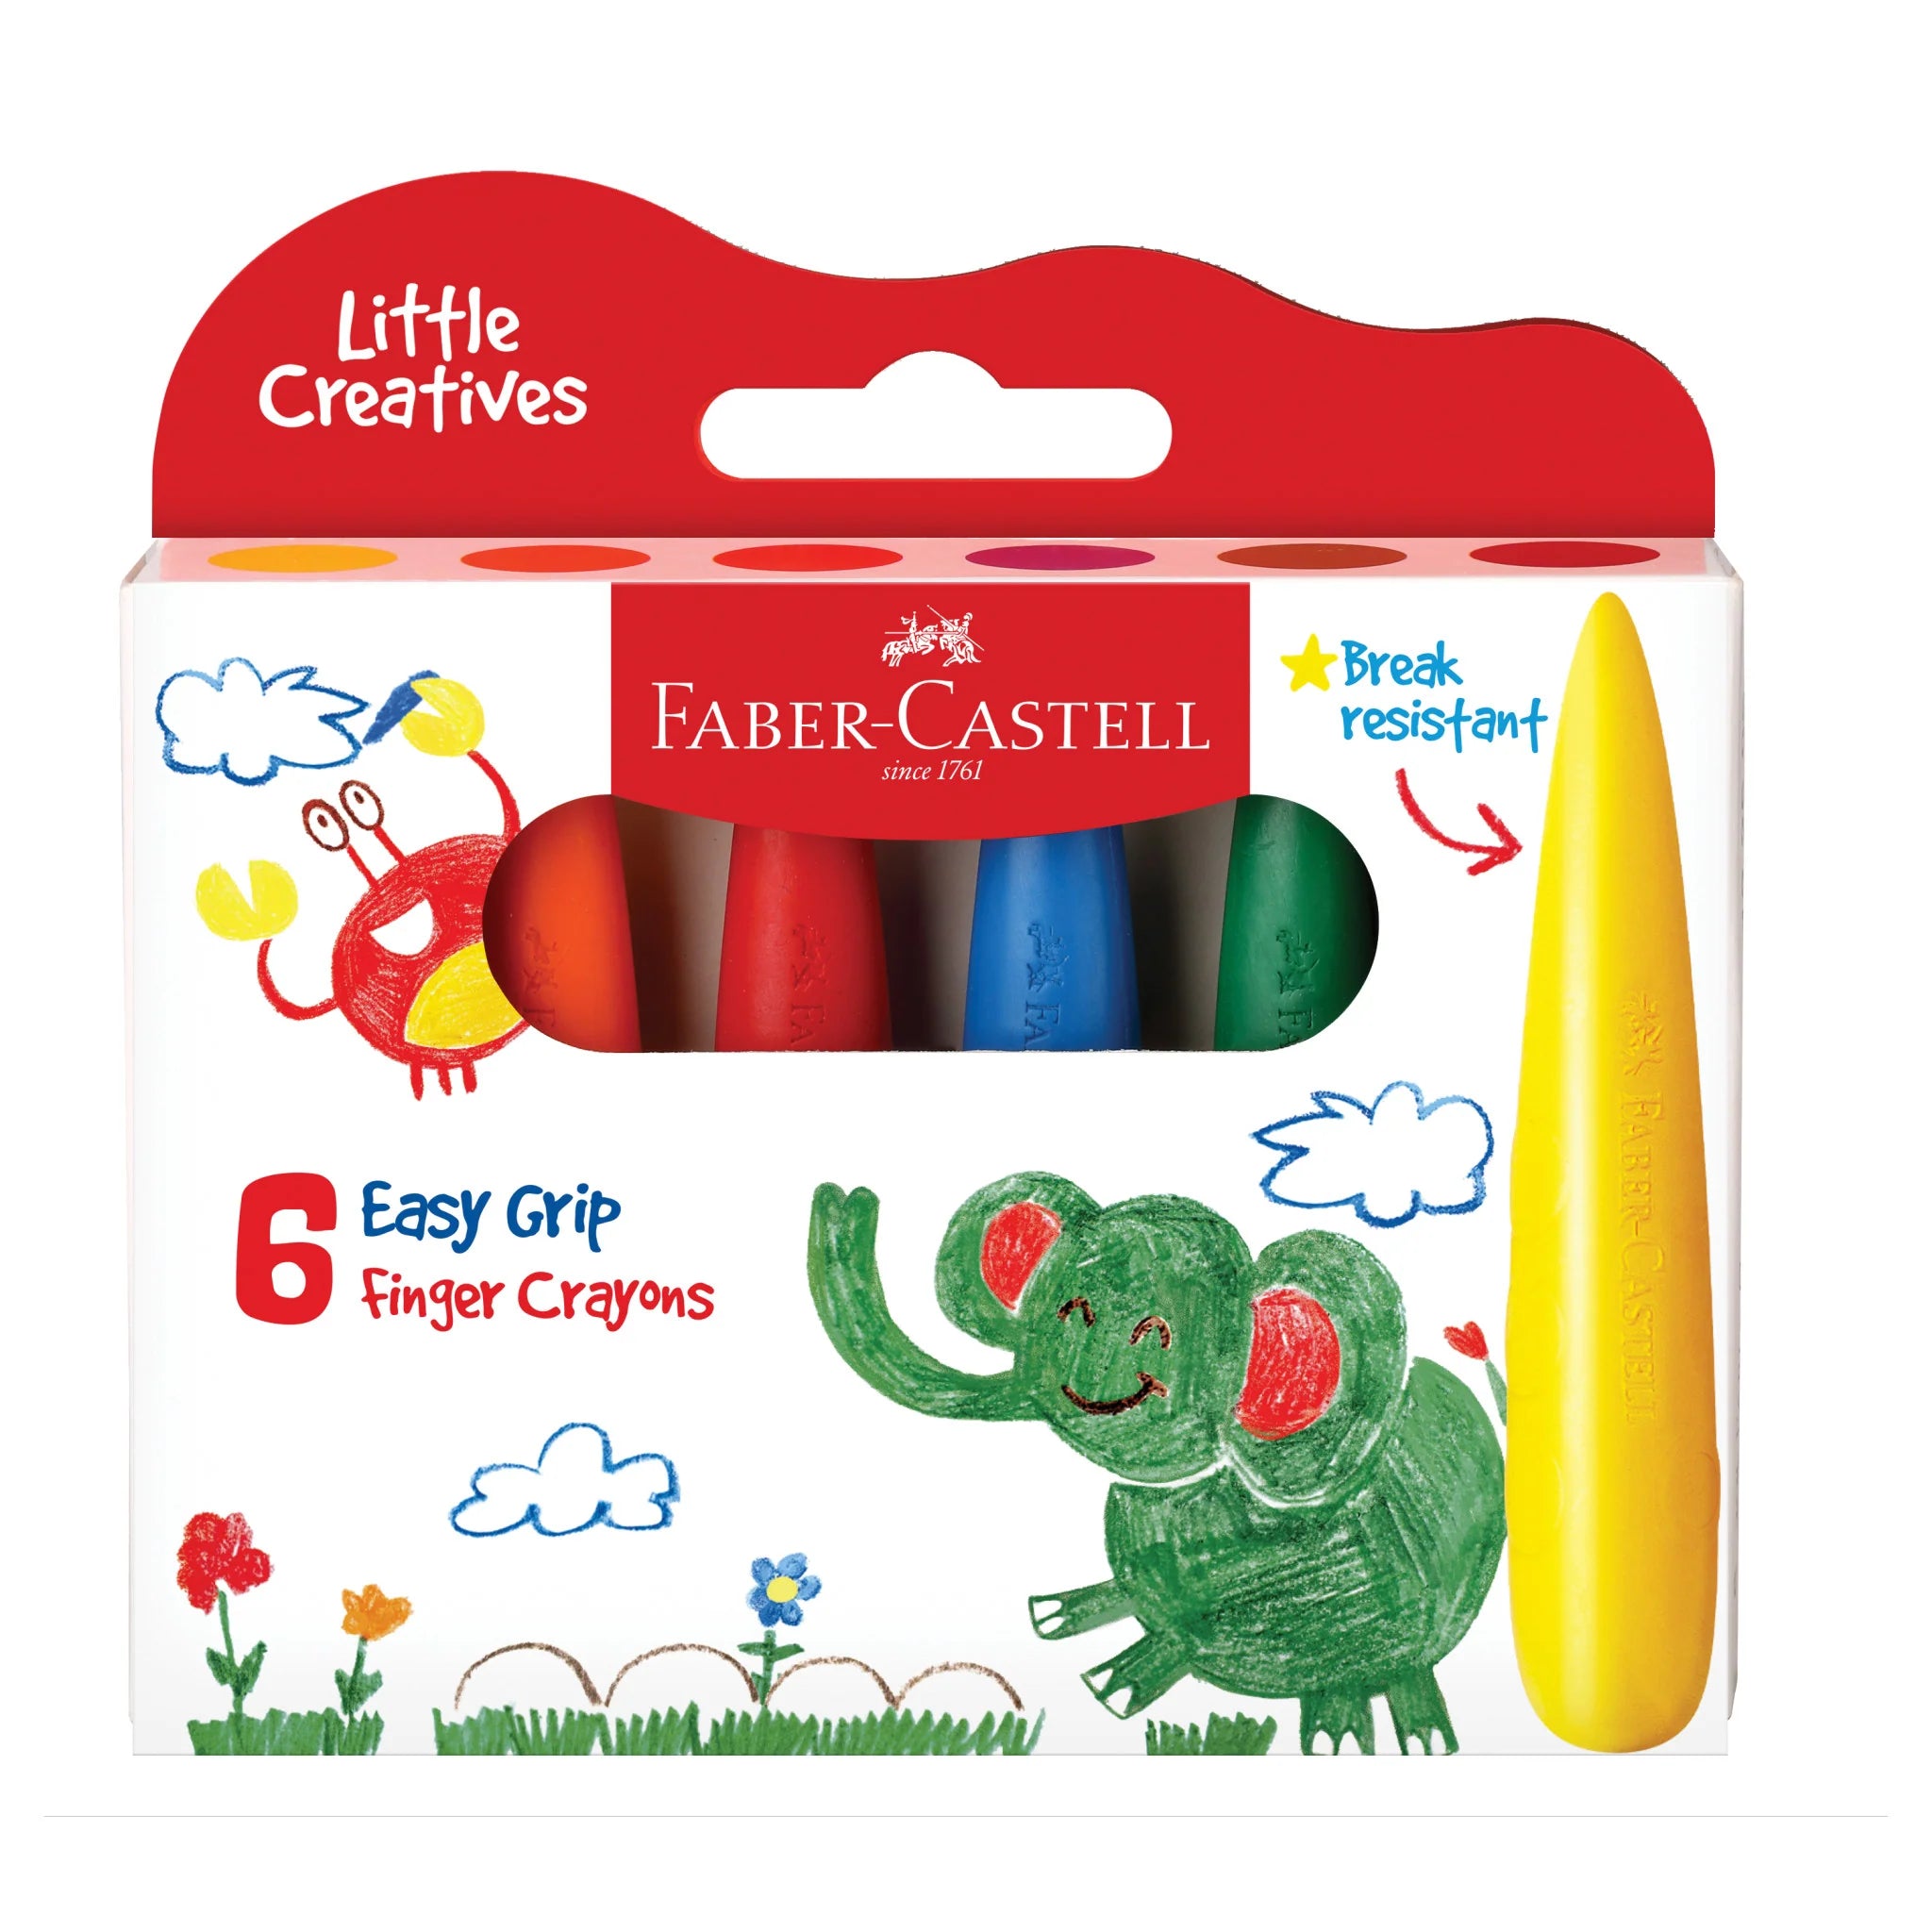 FABER-CASTELL Little Creatives Easy Grip Finger Crayons Set of 6